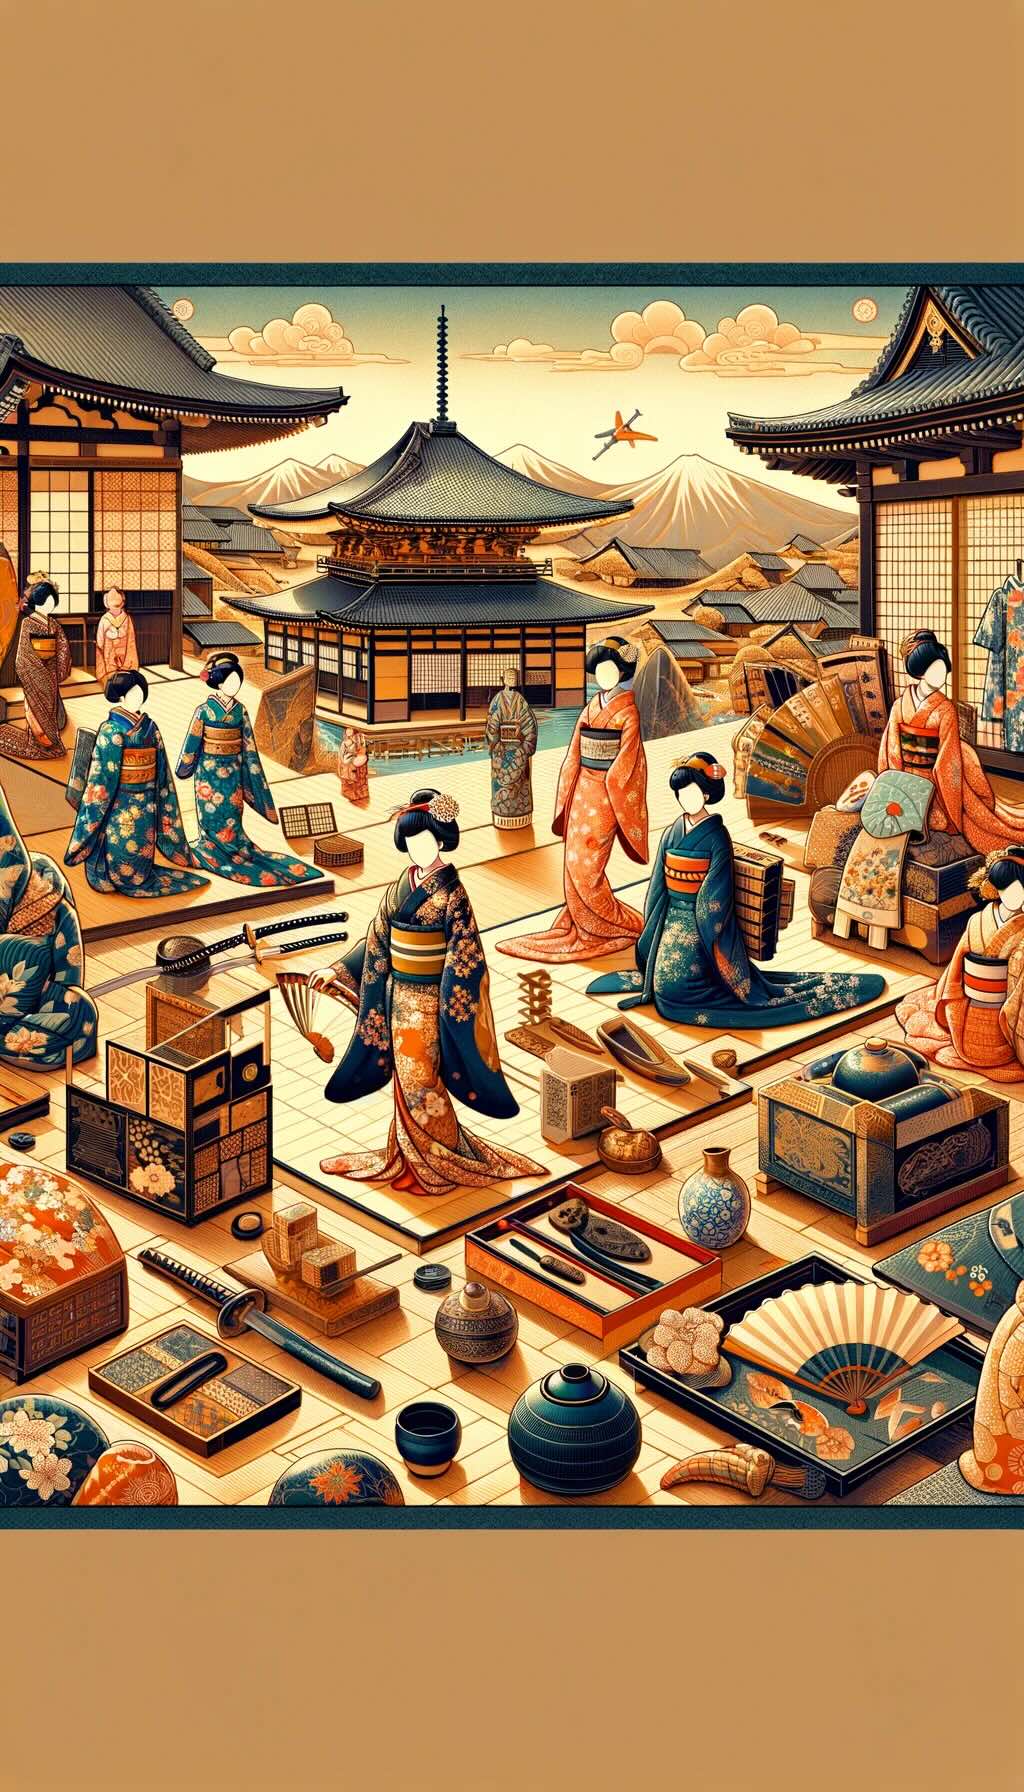 Traditional Japanese crafts and the best places to shop for them. The artwork depicts the elegance of kimonos in Kyoto, diverse pottery in Seto and Arita, the lustrous beauty of lacquerware in Wajima and Kanazawa, intricate woodwork in Hakone, and the artistry of Washi in Echizen, along with depictions of traditional Japanese dolls. The composition conveys the rich cultural heritage and artistic expression embedded in these crafts